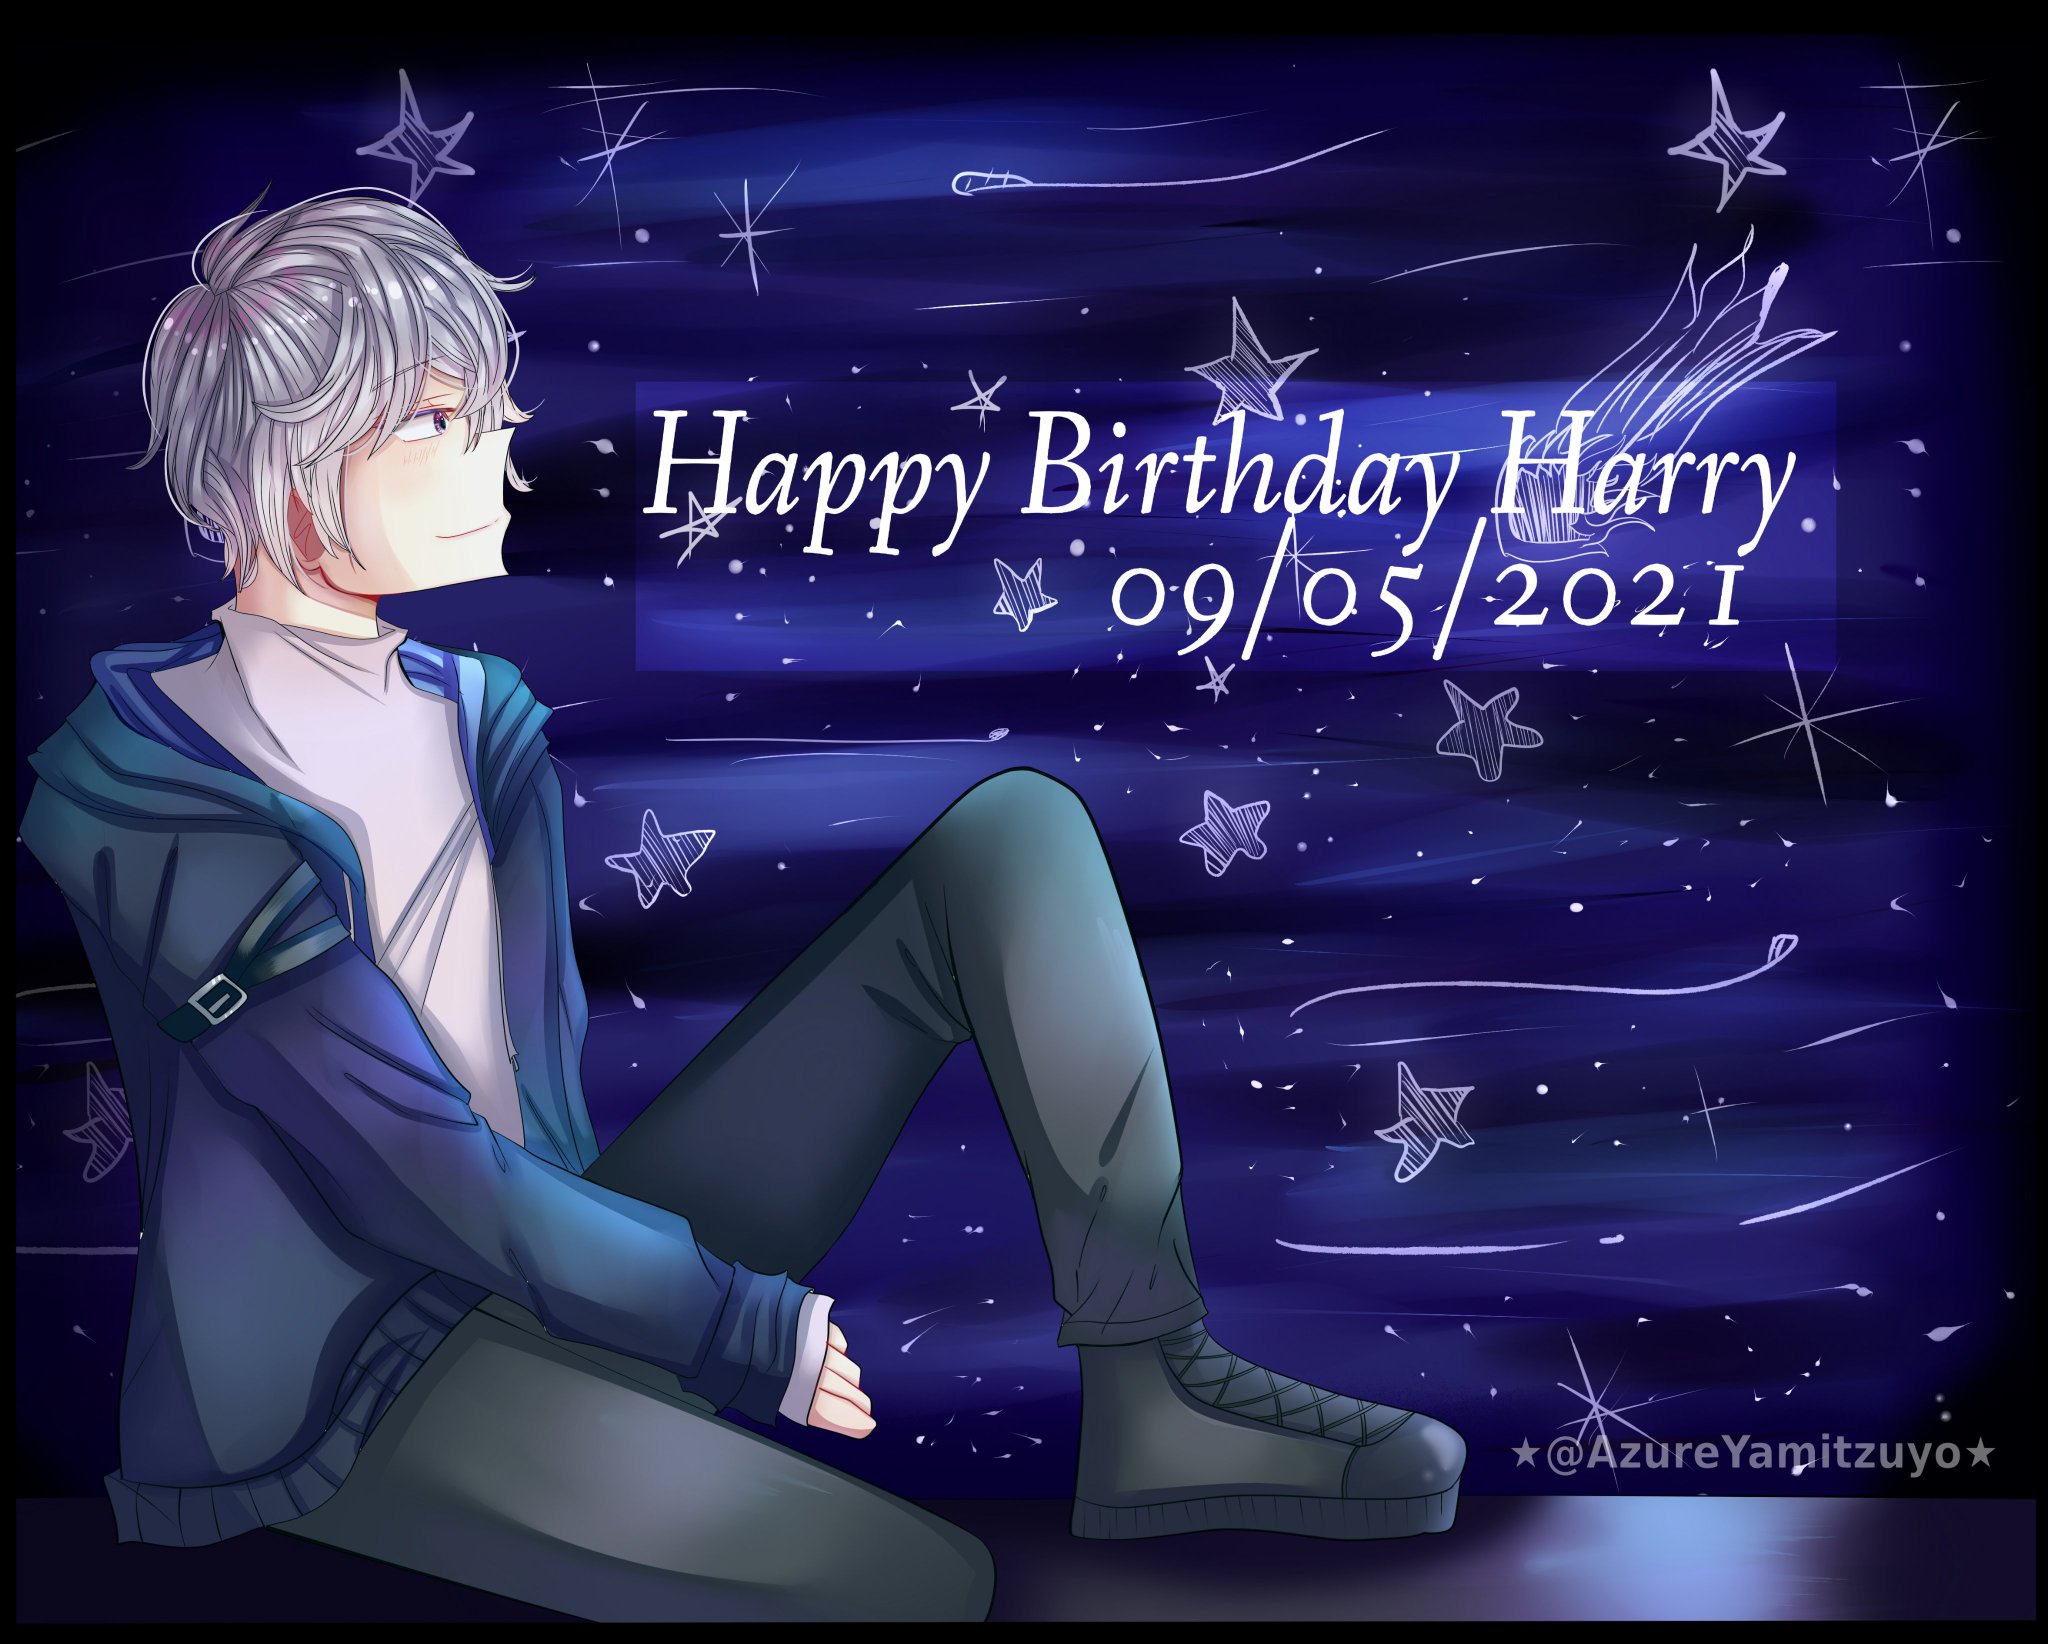 Alex Trey's | COMISIONES CLOSED on X: Happy Birtℎday Harry Happy Birthday  to my favourite character (and my love) from: #DangerousFellows  #CompañerosPeligrosos Hope you like #Harry #HarryDF #LucyDream #anime  #otome #animetwt ...